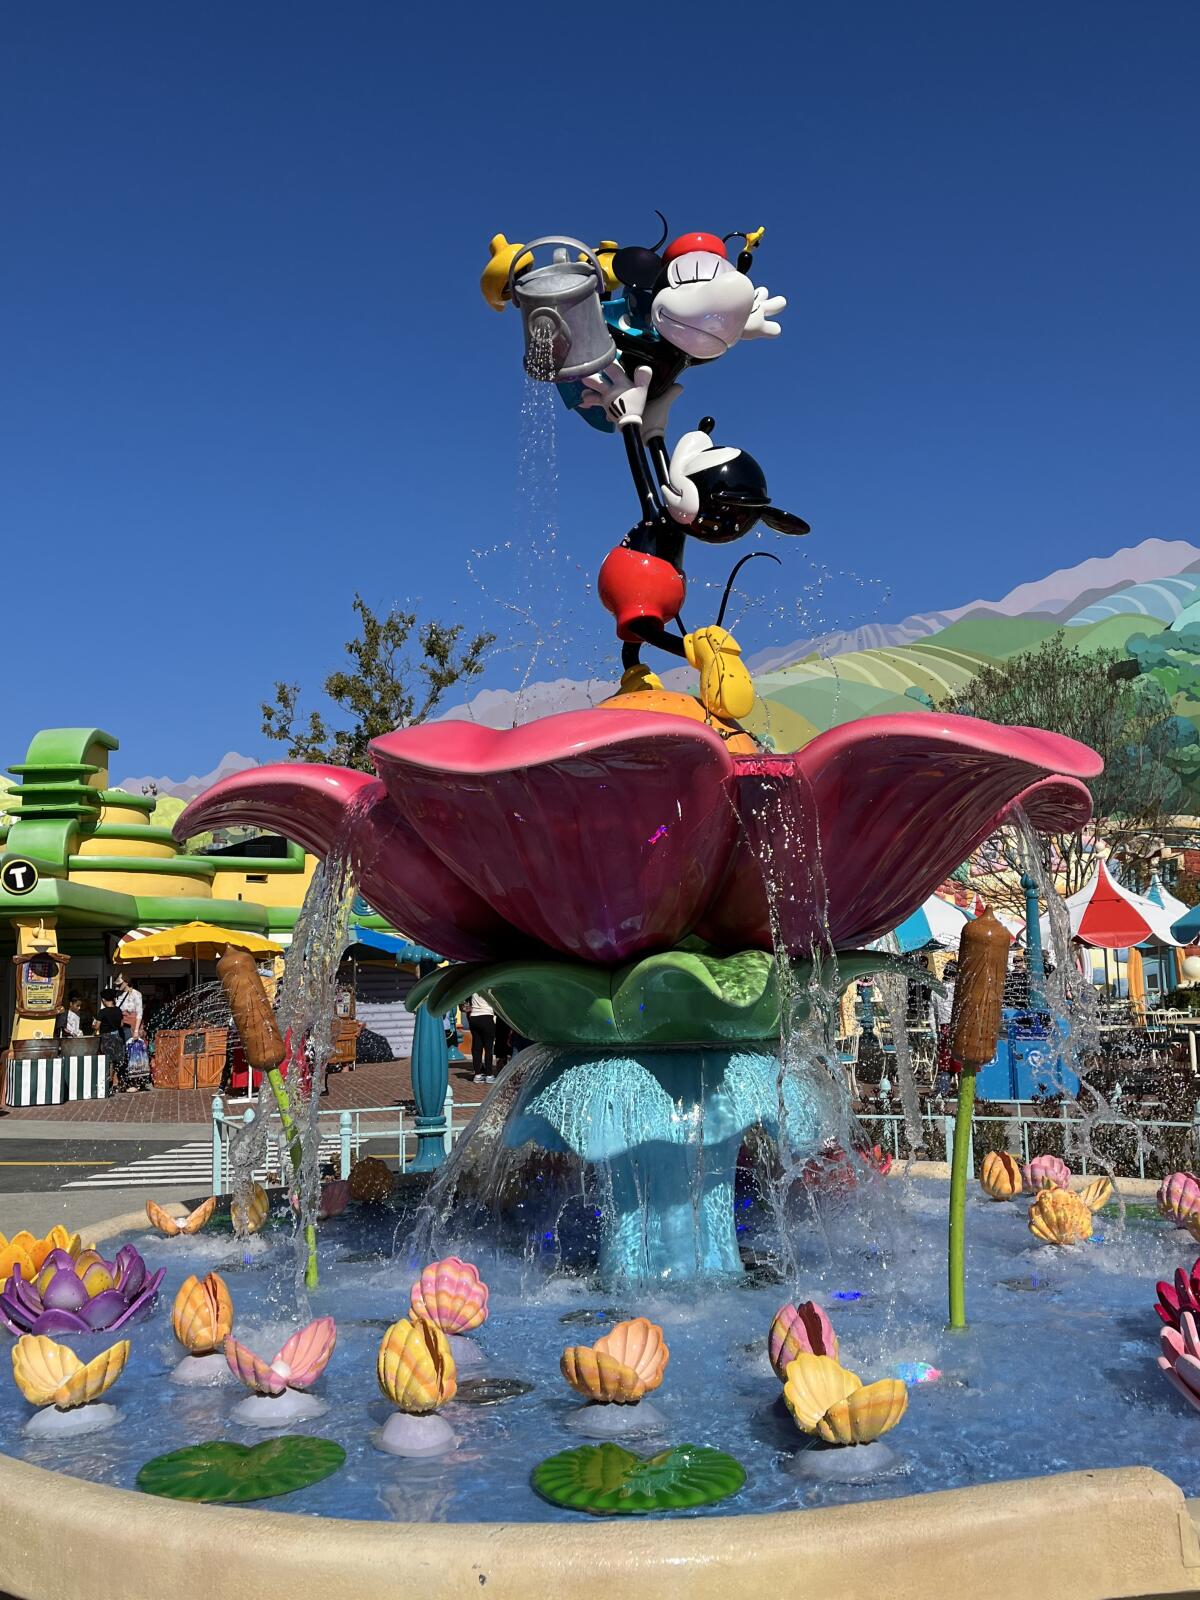 The water fountain at CenTOONial Park features water tables for kids to splash in at Mickey's Toontown at Disneyland.